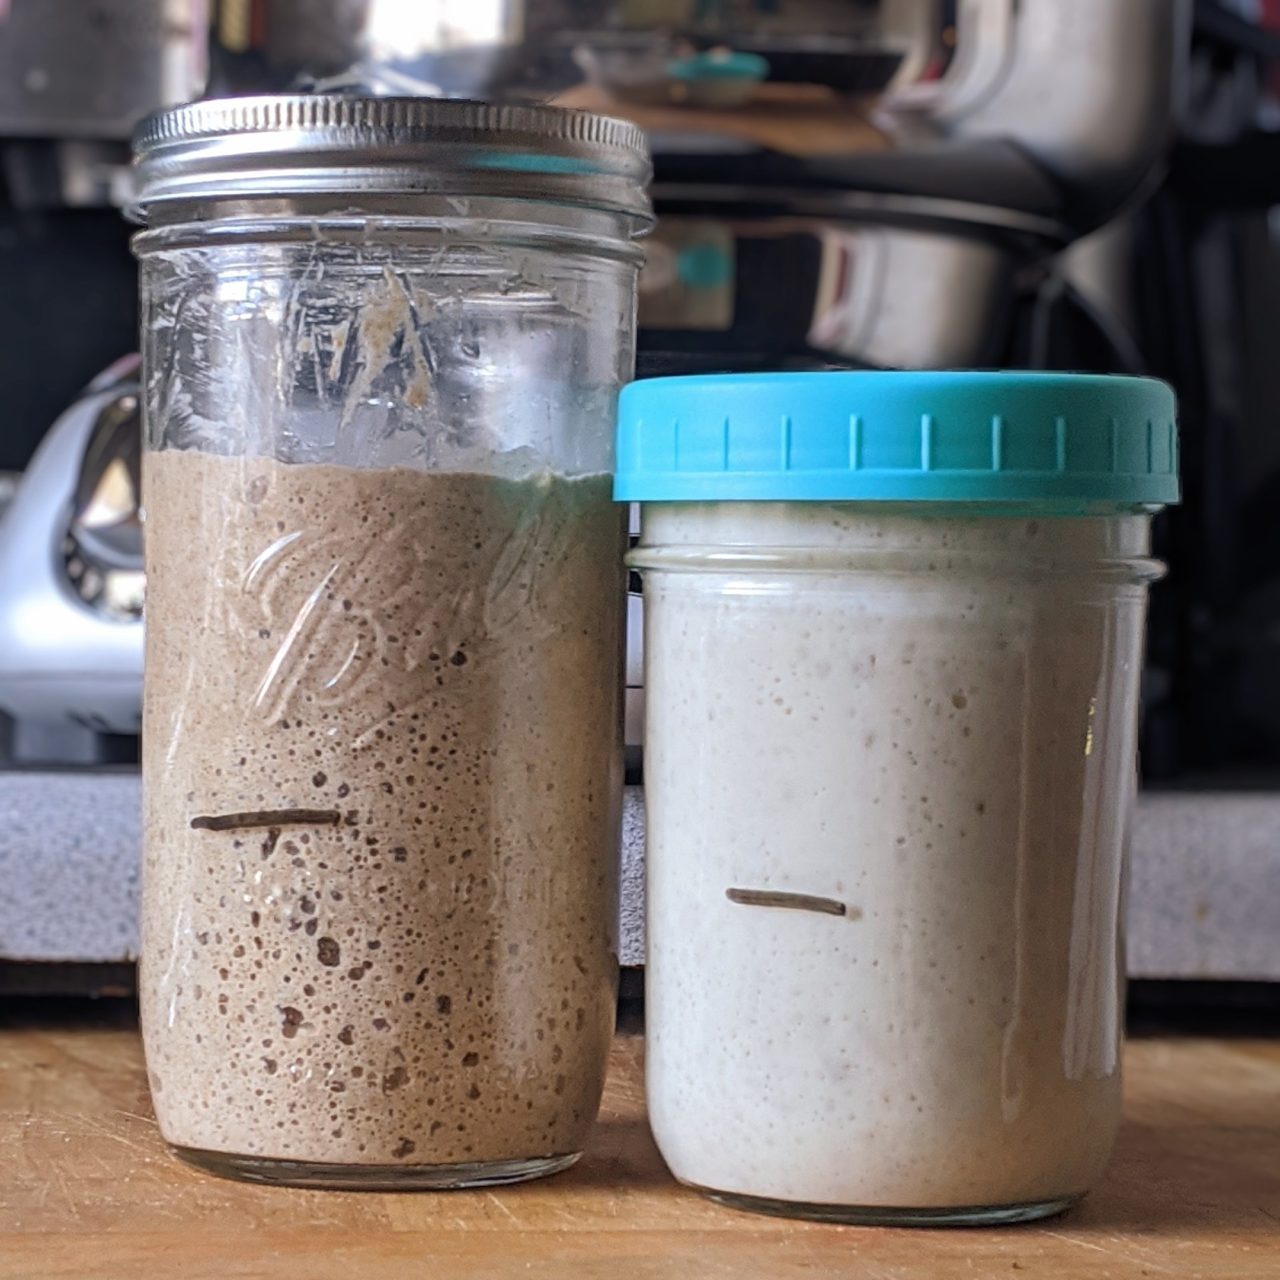 Two mason jars of sourdough starter. One is rye and one is a preferment of bread flour